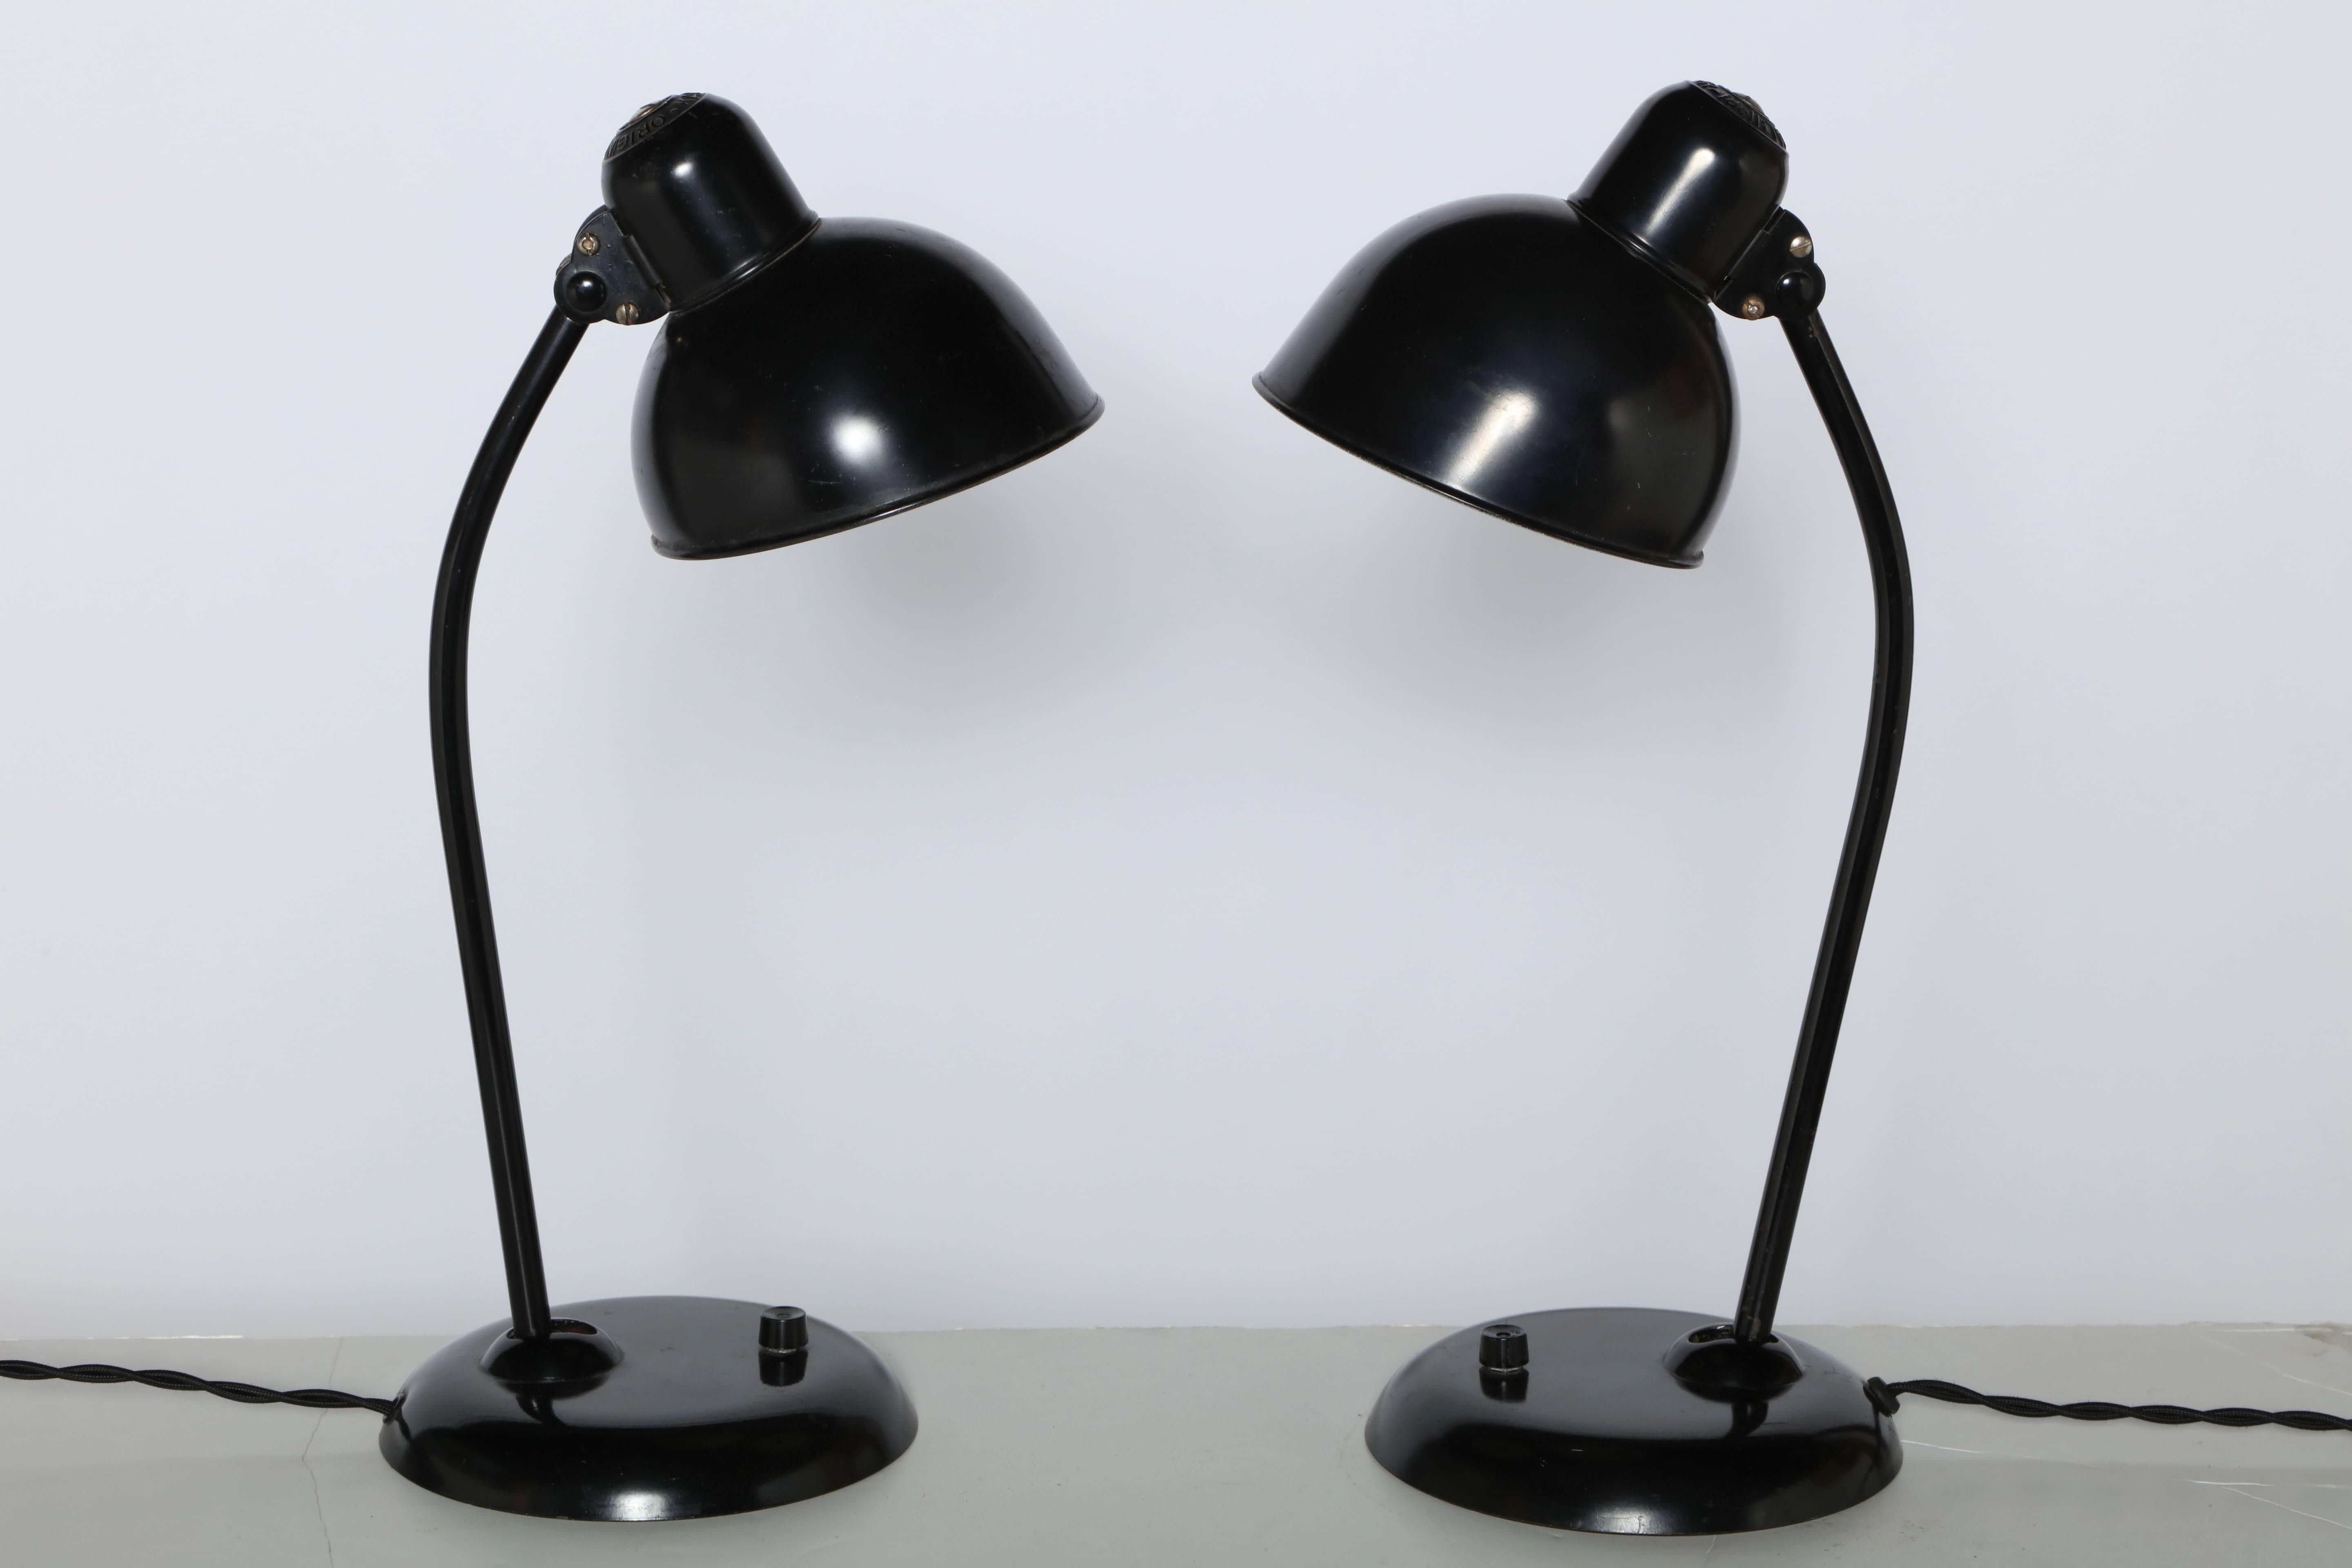 Pair of early version All Black Christian Dell for Kaiser Idell 6556 adjustable Table Lamps. Featuring adjustable 6D Black  enameled metal Shade, arm and base with Off-White Interior. Round 7.5D knuckle base. Base switch. Original condition. Made in